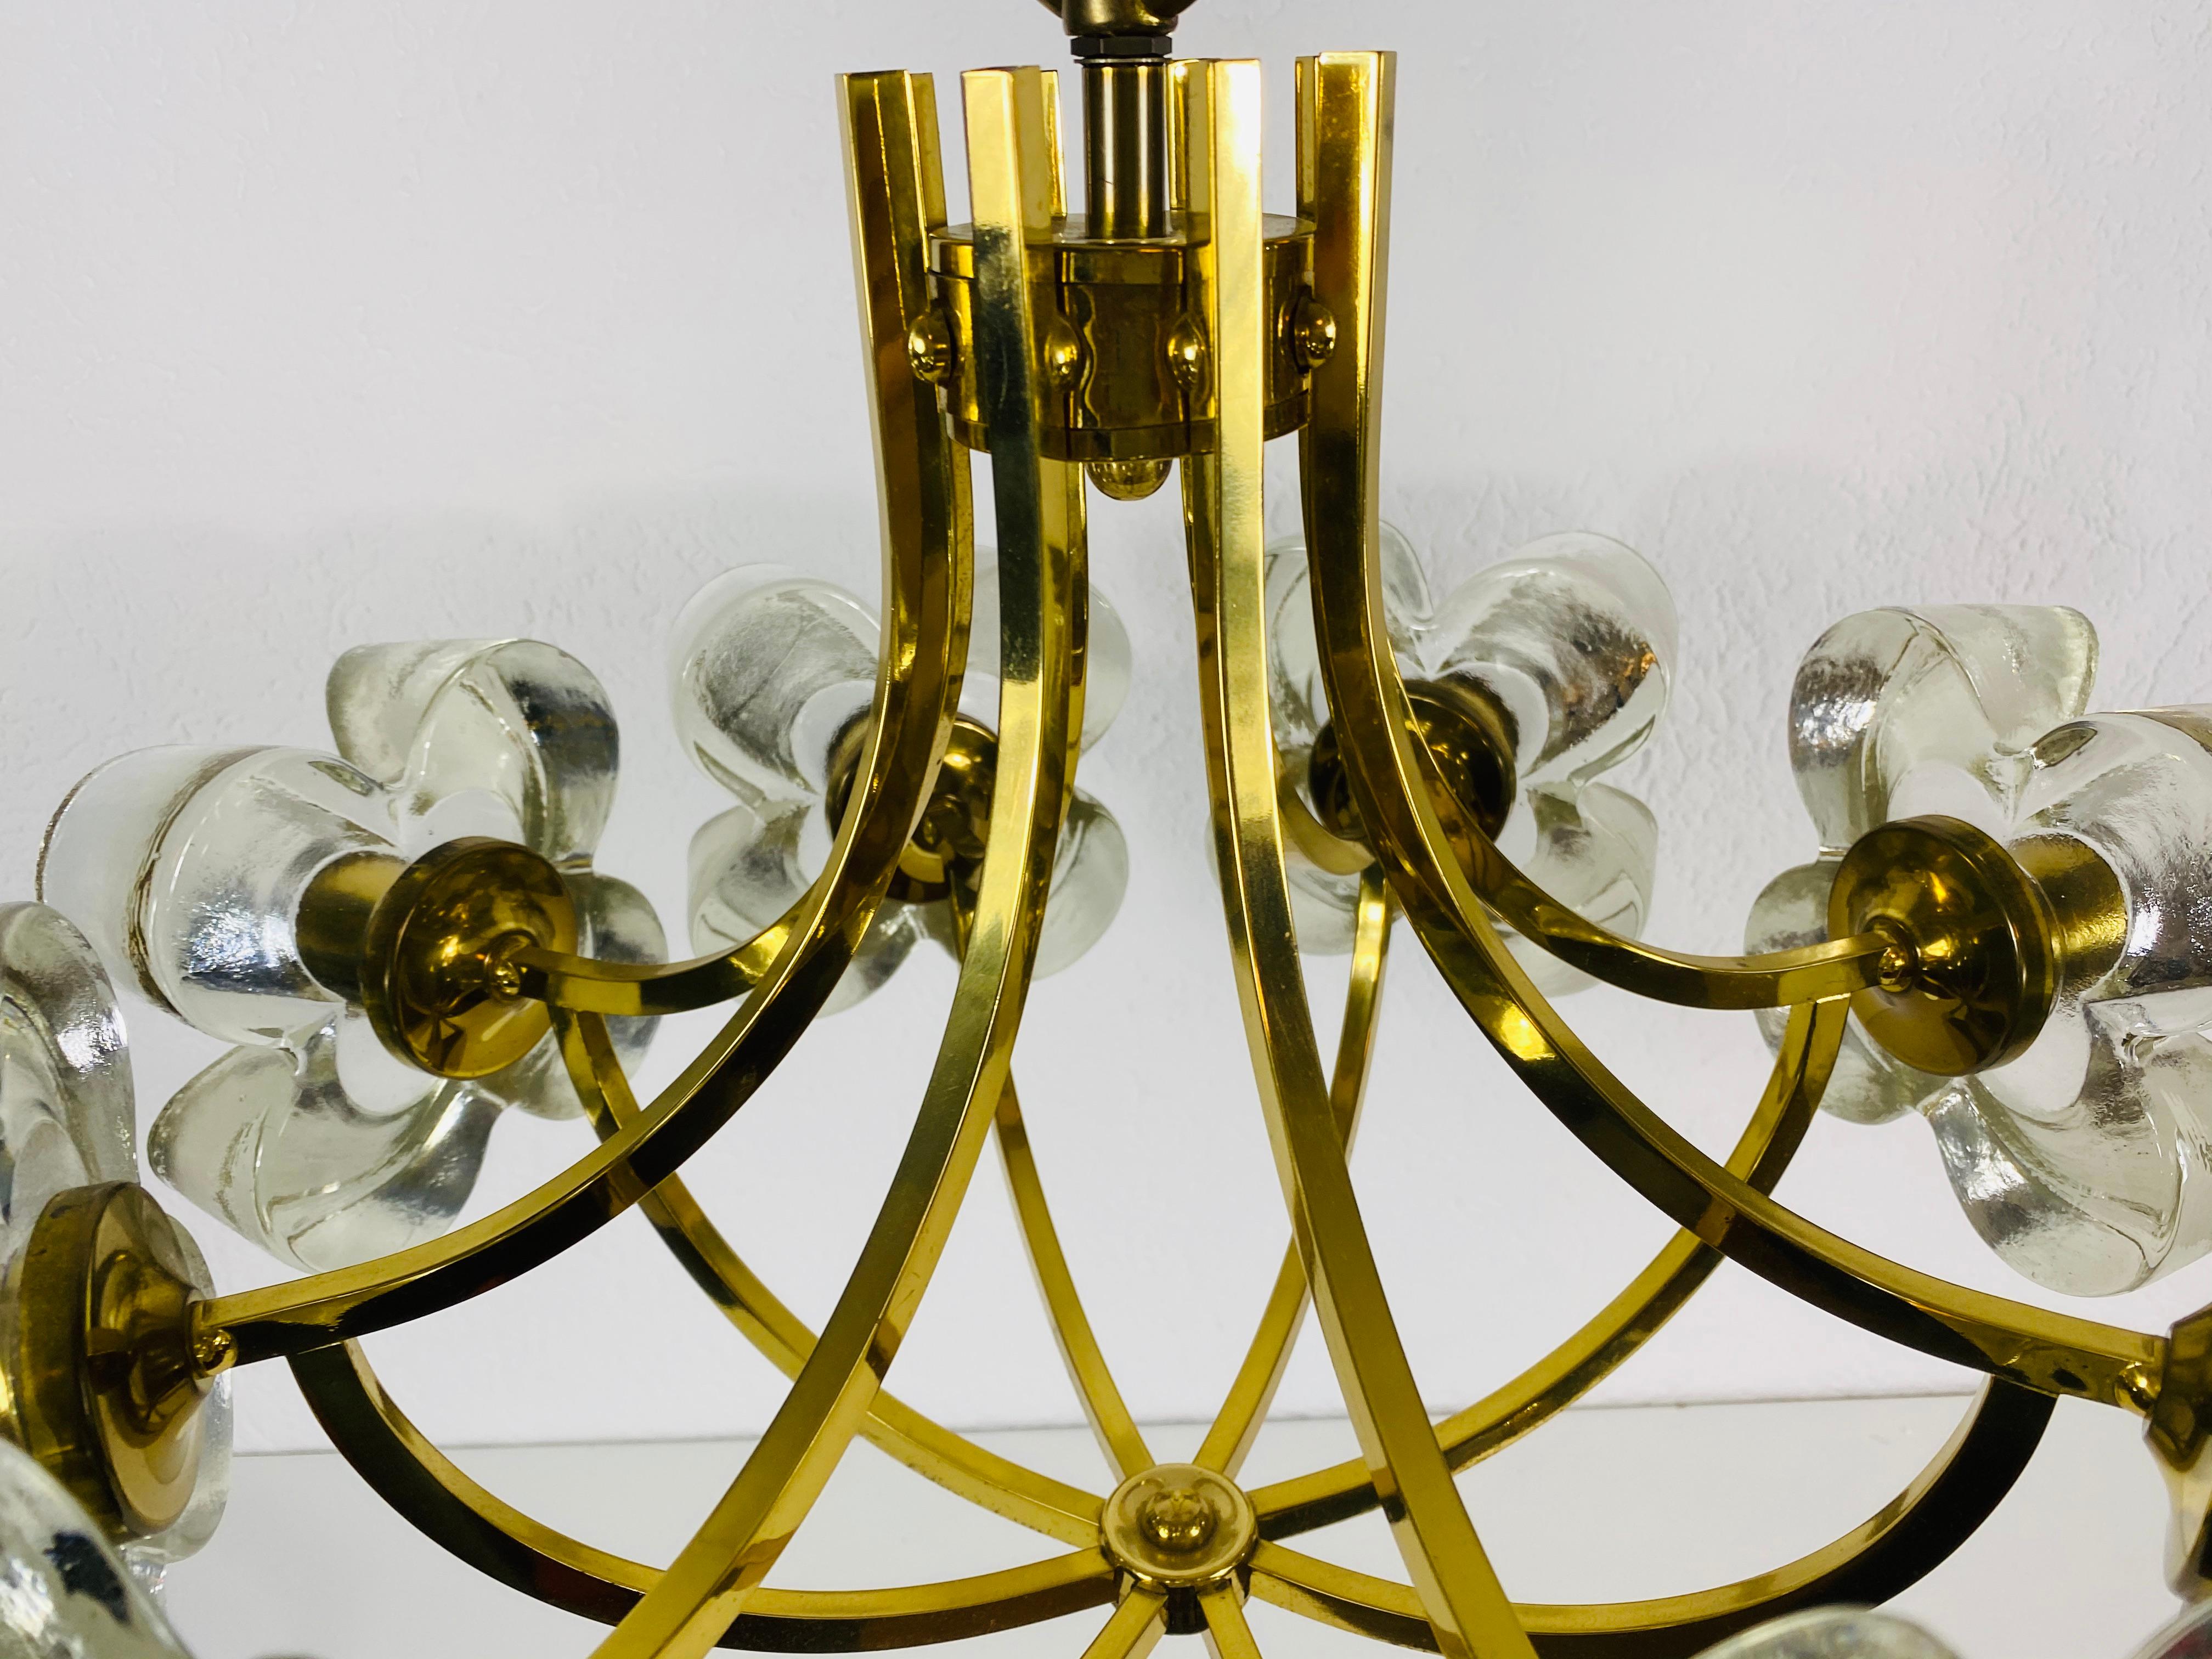 Italian Midcentury Glass and Brass 8-Arm Chandelier Mazzega Attributed, 1960s For Sale 2